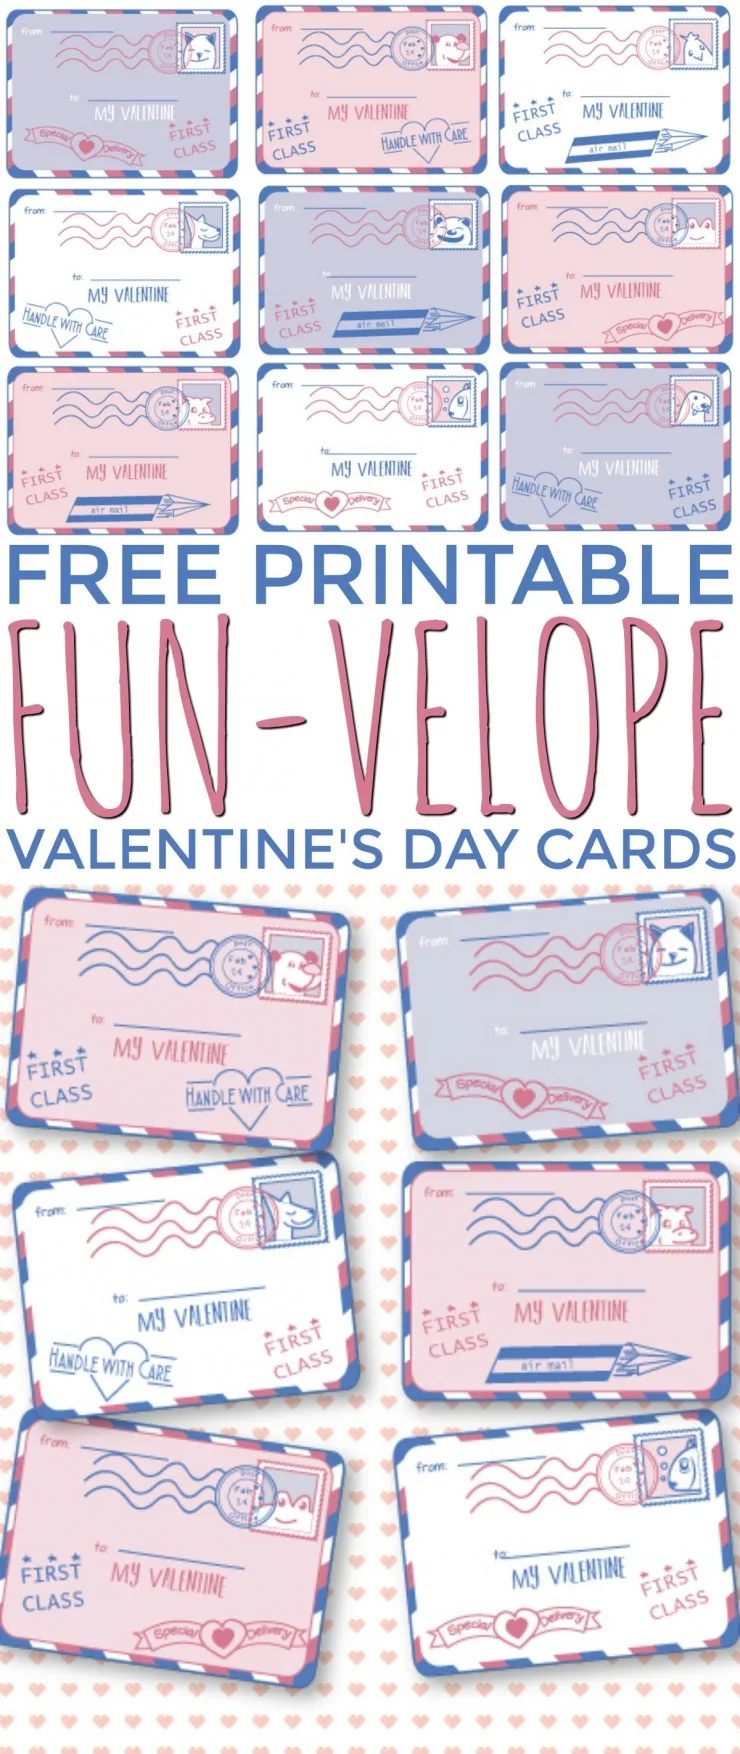 These 9 Free Printable Fun-Velope Valentine's Day Cards are super cute - they are made to look like little envelopes that can be addressed to each recipient.